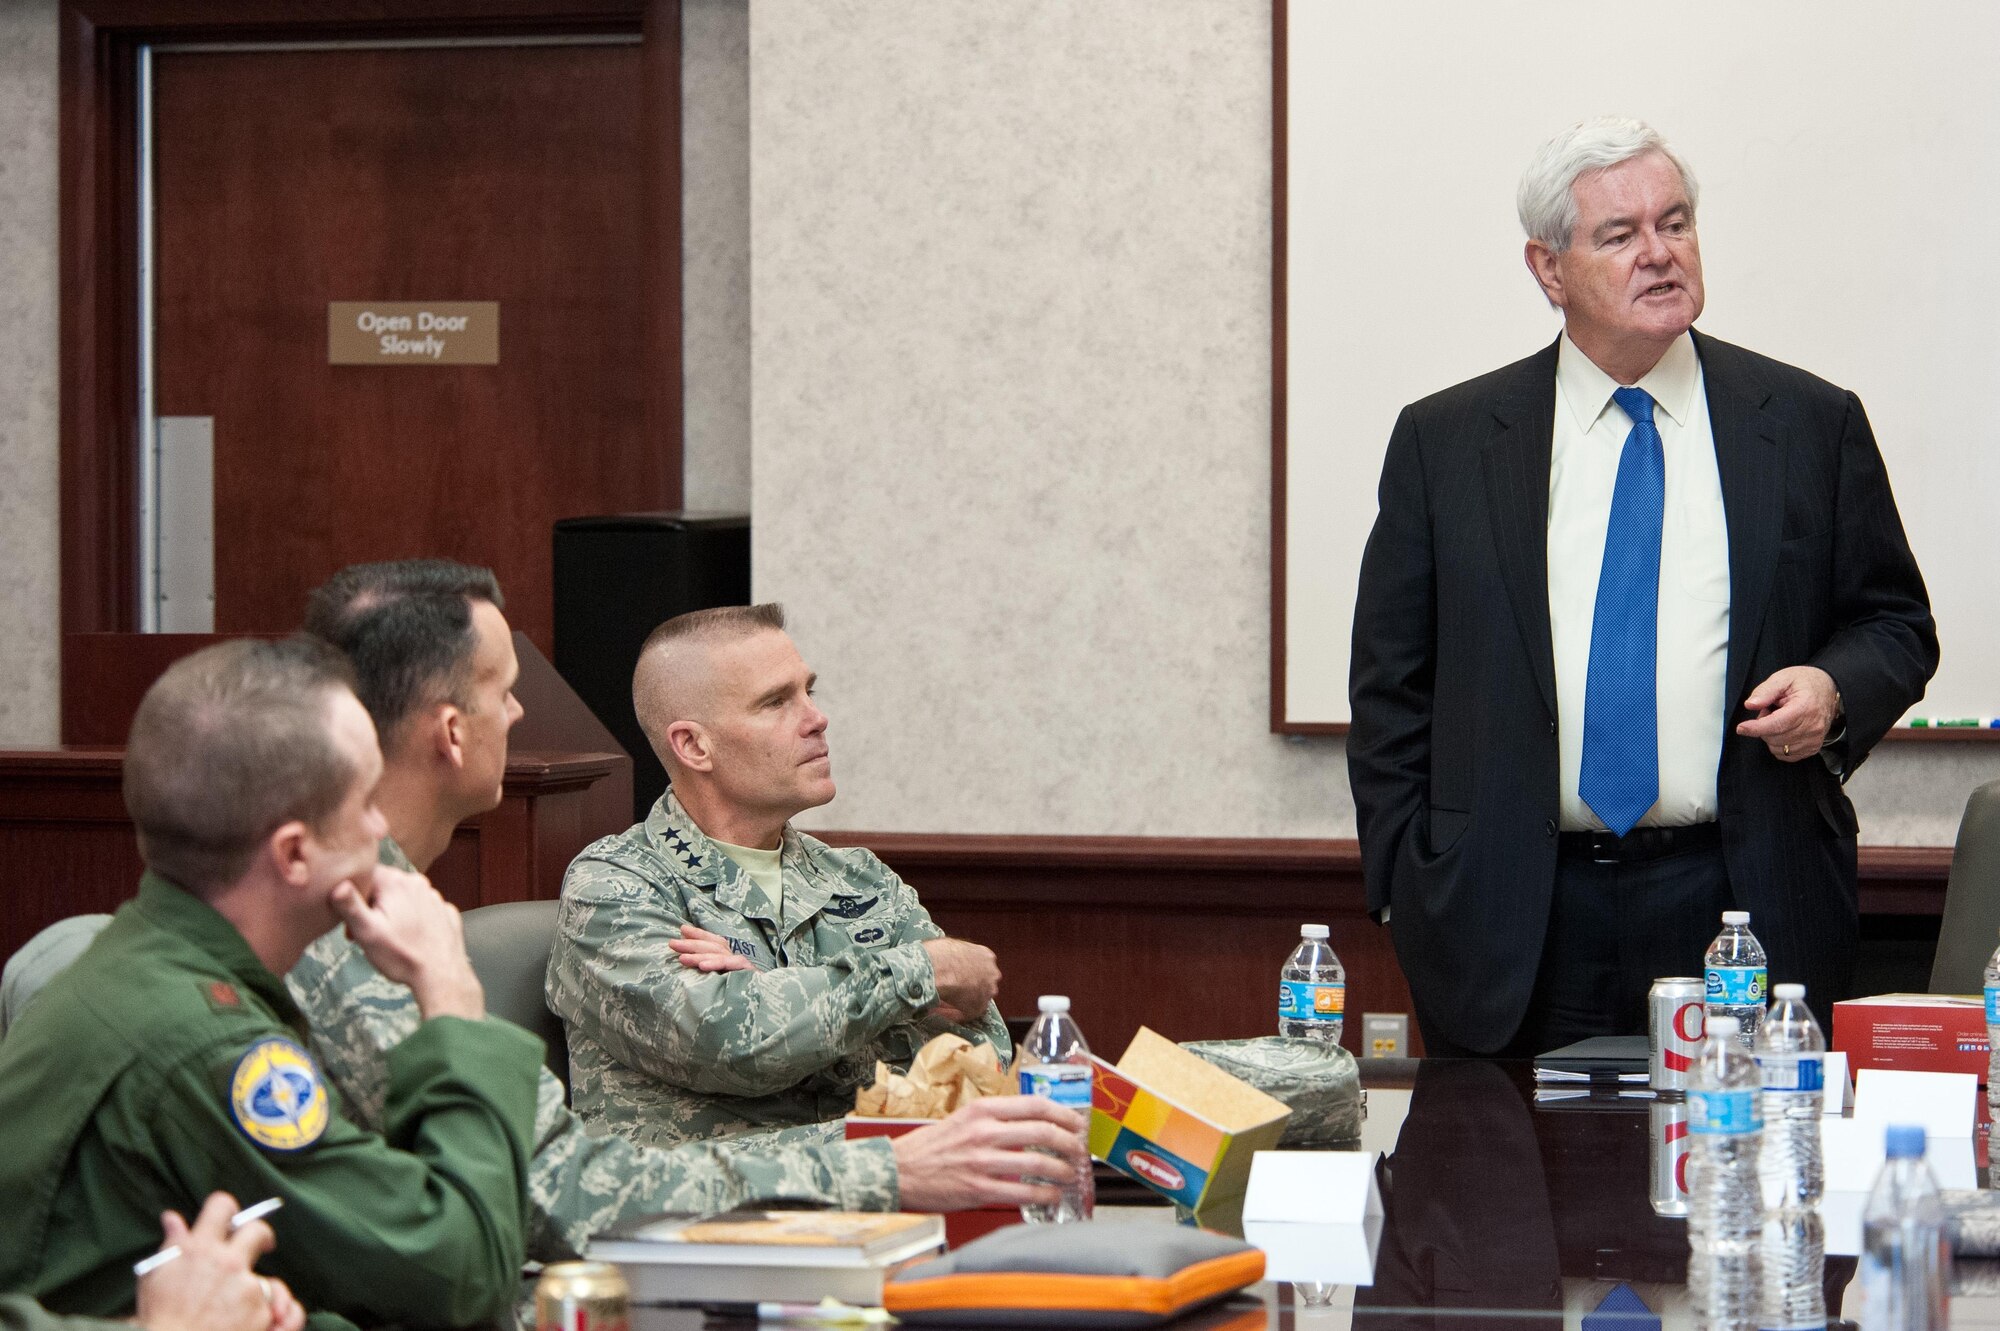 Newt Gingrich, 50th Speaker of the U.S. House of Representatives, engages with students of the Blue Horizons and School of Advanced Air and Space Studies, March 16, 2017. Gingrich's visit is part of Air University's forums designed to foster two-way communication between students learning from experiences in D.C. and his learning about AU research topics like Air Force space initiatives.  (US Air Force photo by Melanie Rodgers Cox/Released)